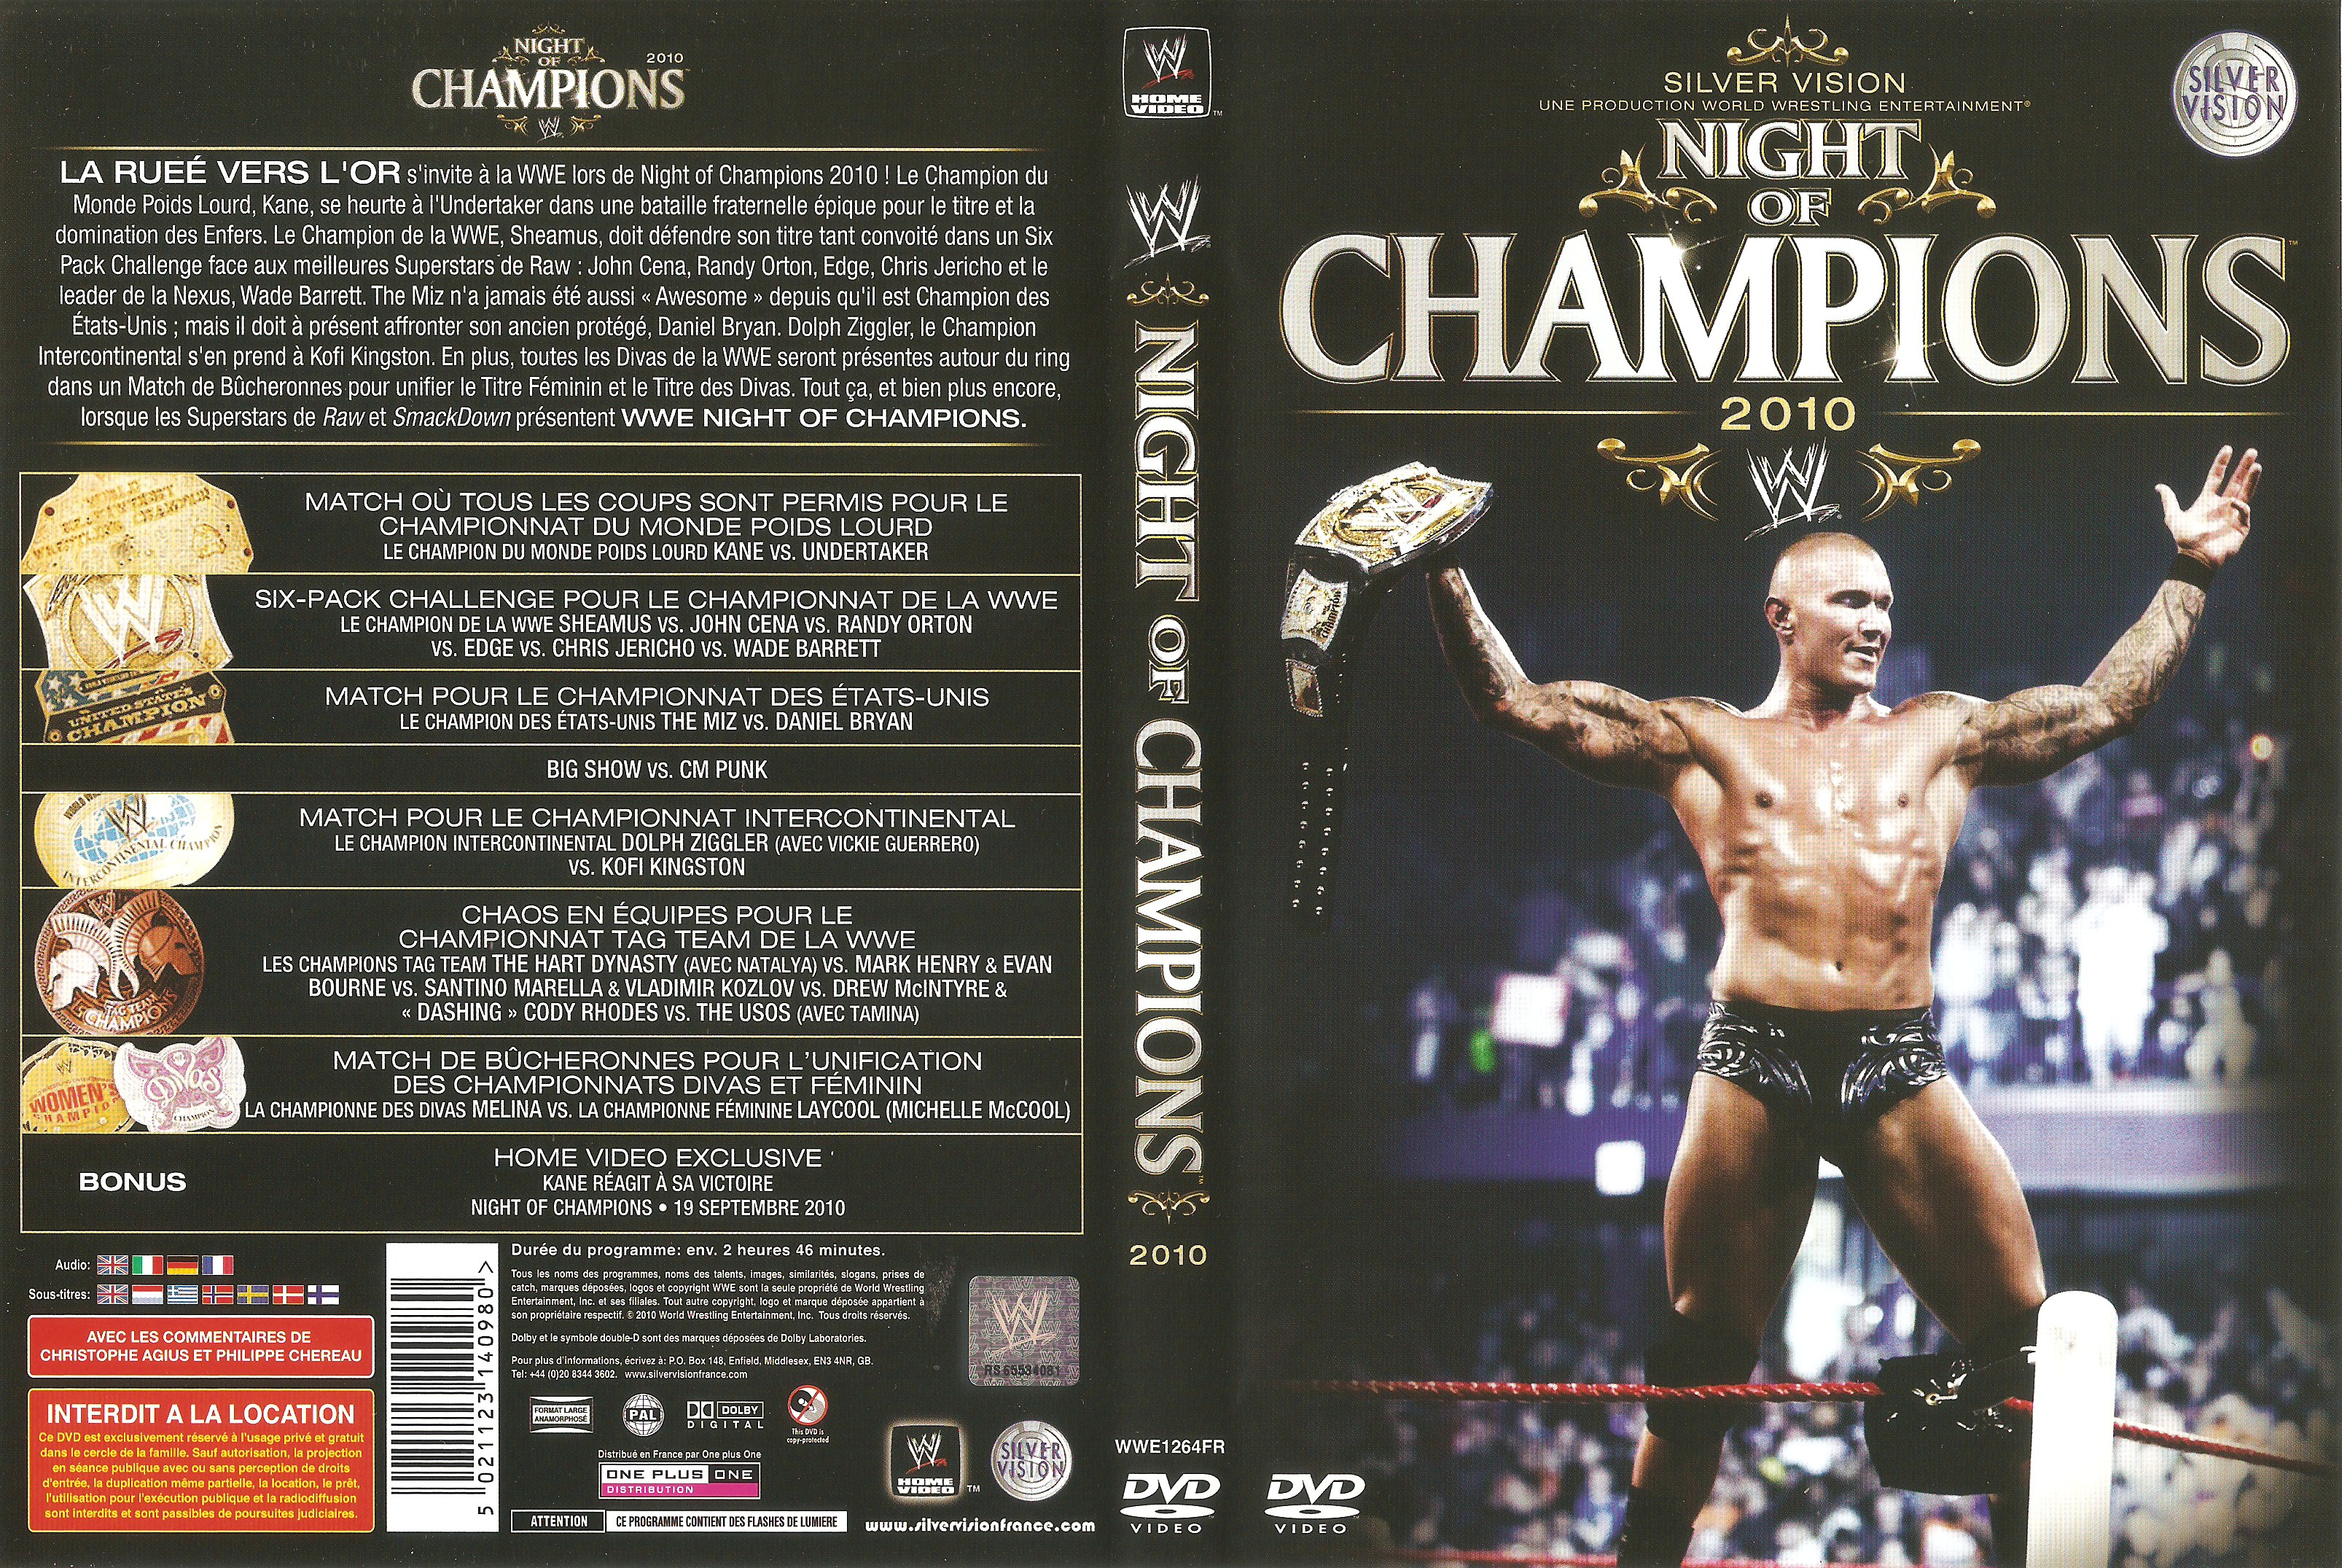 Jaquette DVD WWE Night of Champions 2010